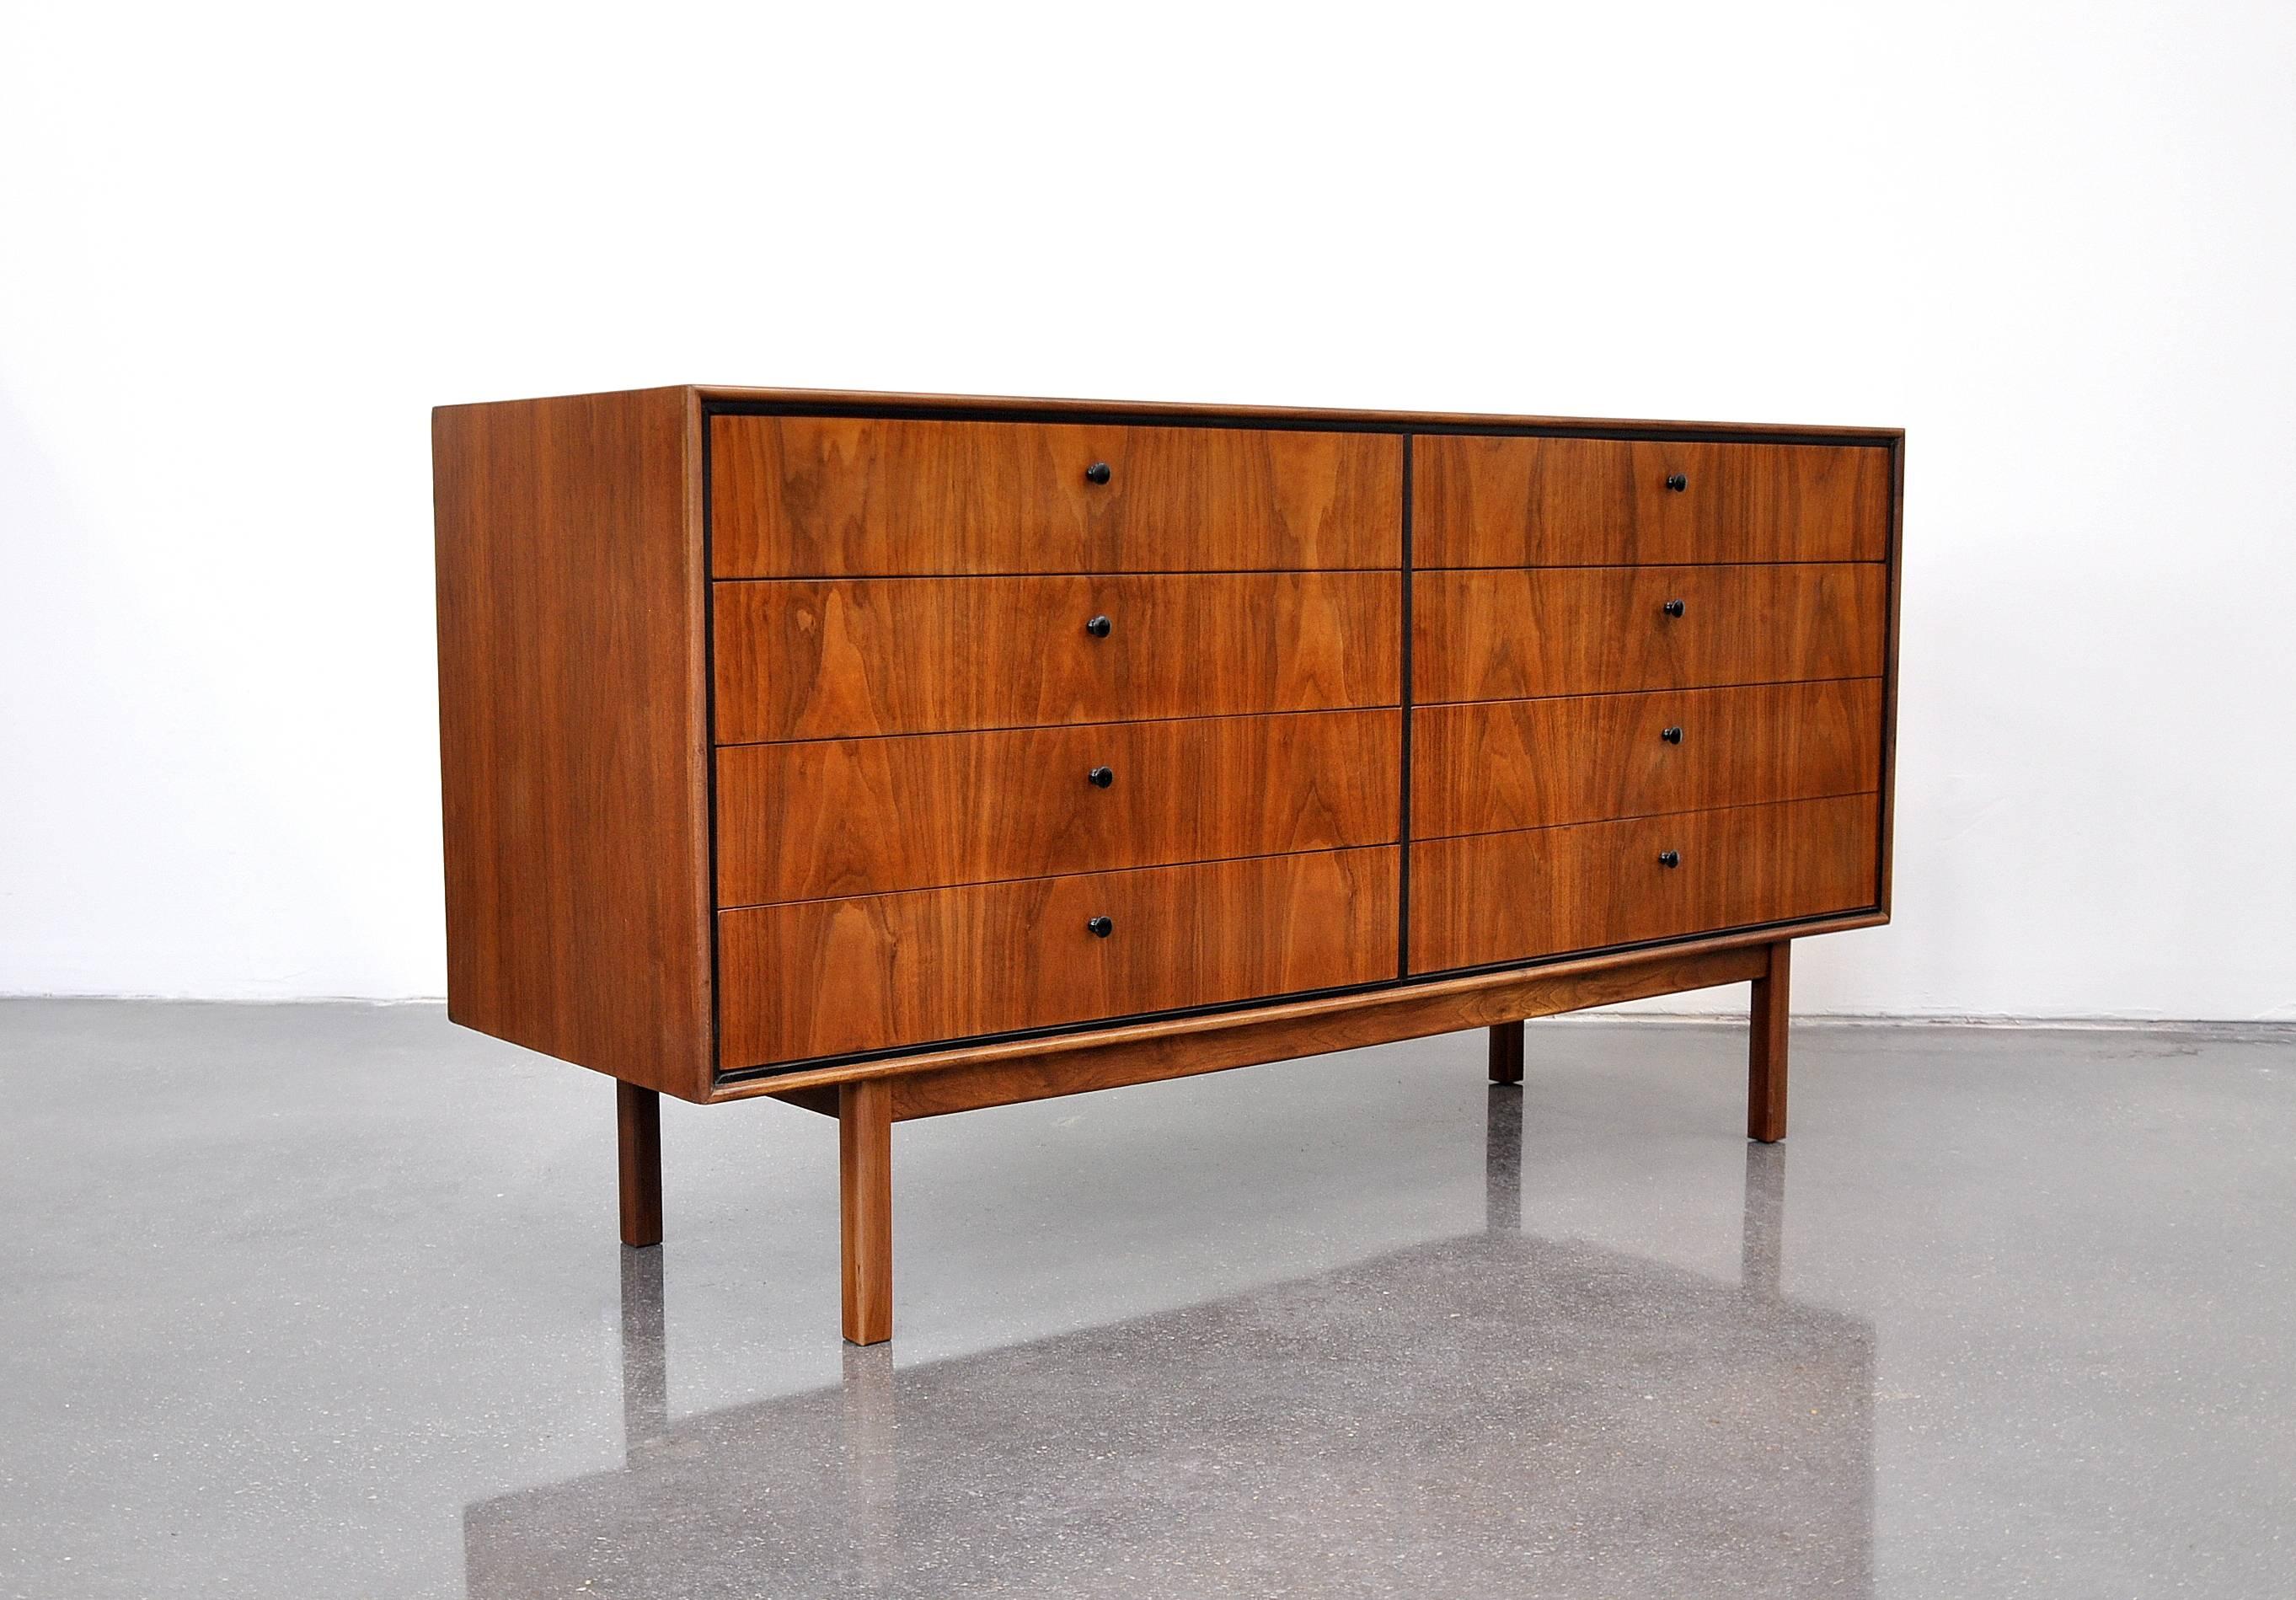 Early and rare Mid-Century Modern vintage eight-drawer dresser designed by Milo Baughman for Arch Gordon in the 1950s. Professionally refinished, the beautifully grained walnut boasts striking patterns. The drawer fronts are fitted with black pulls